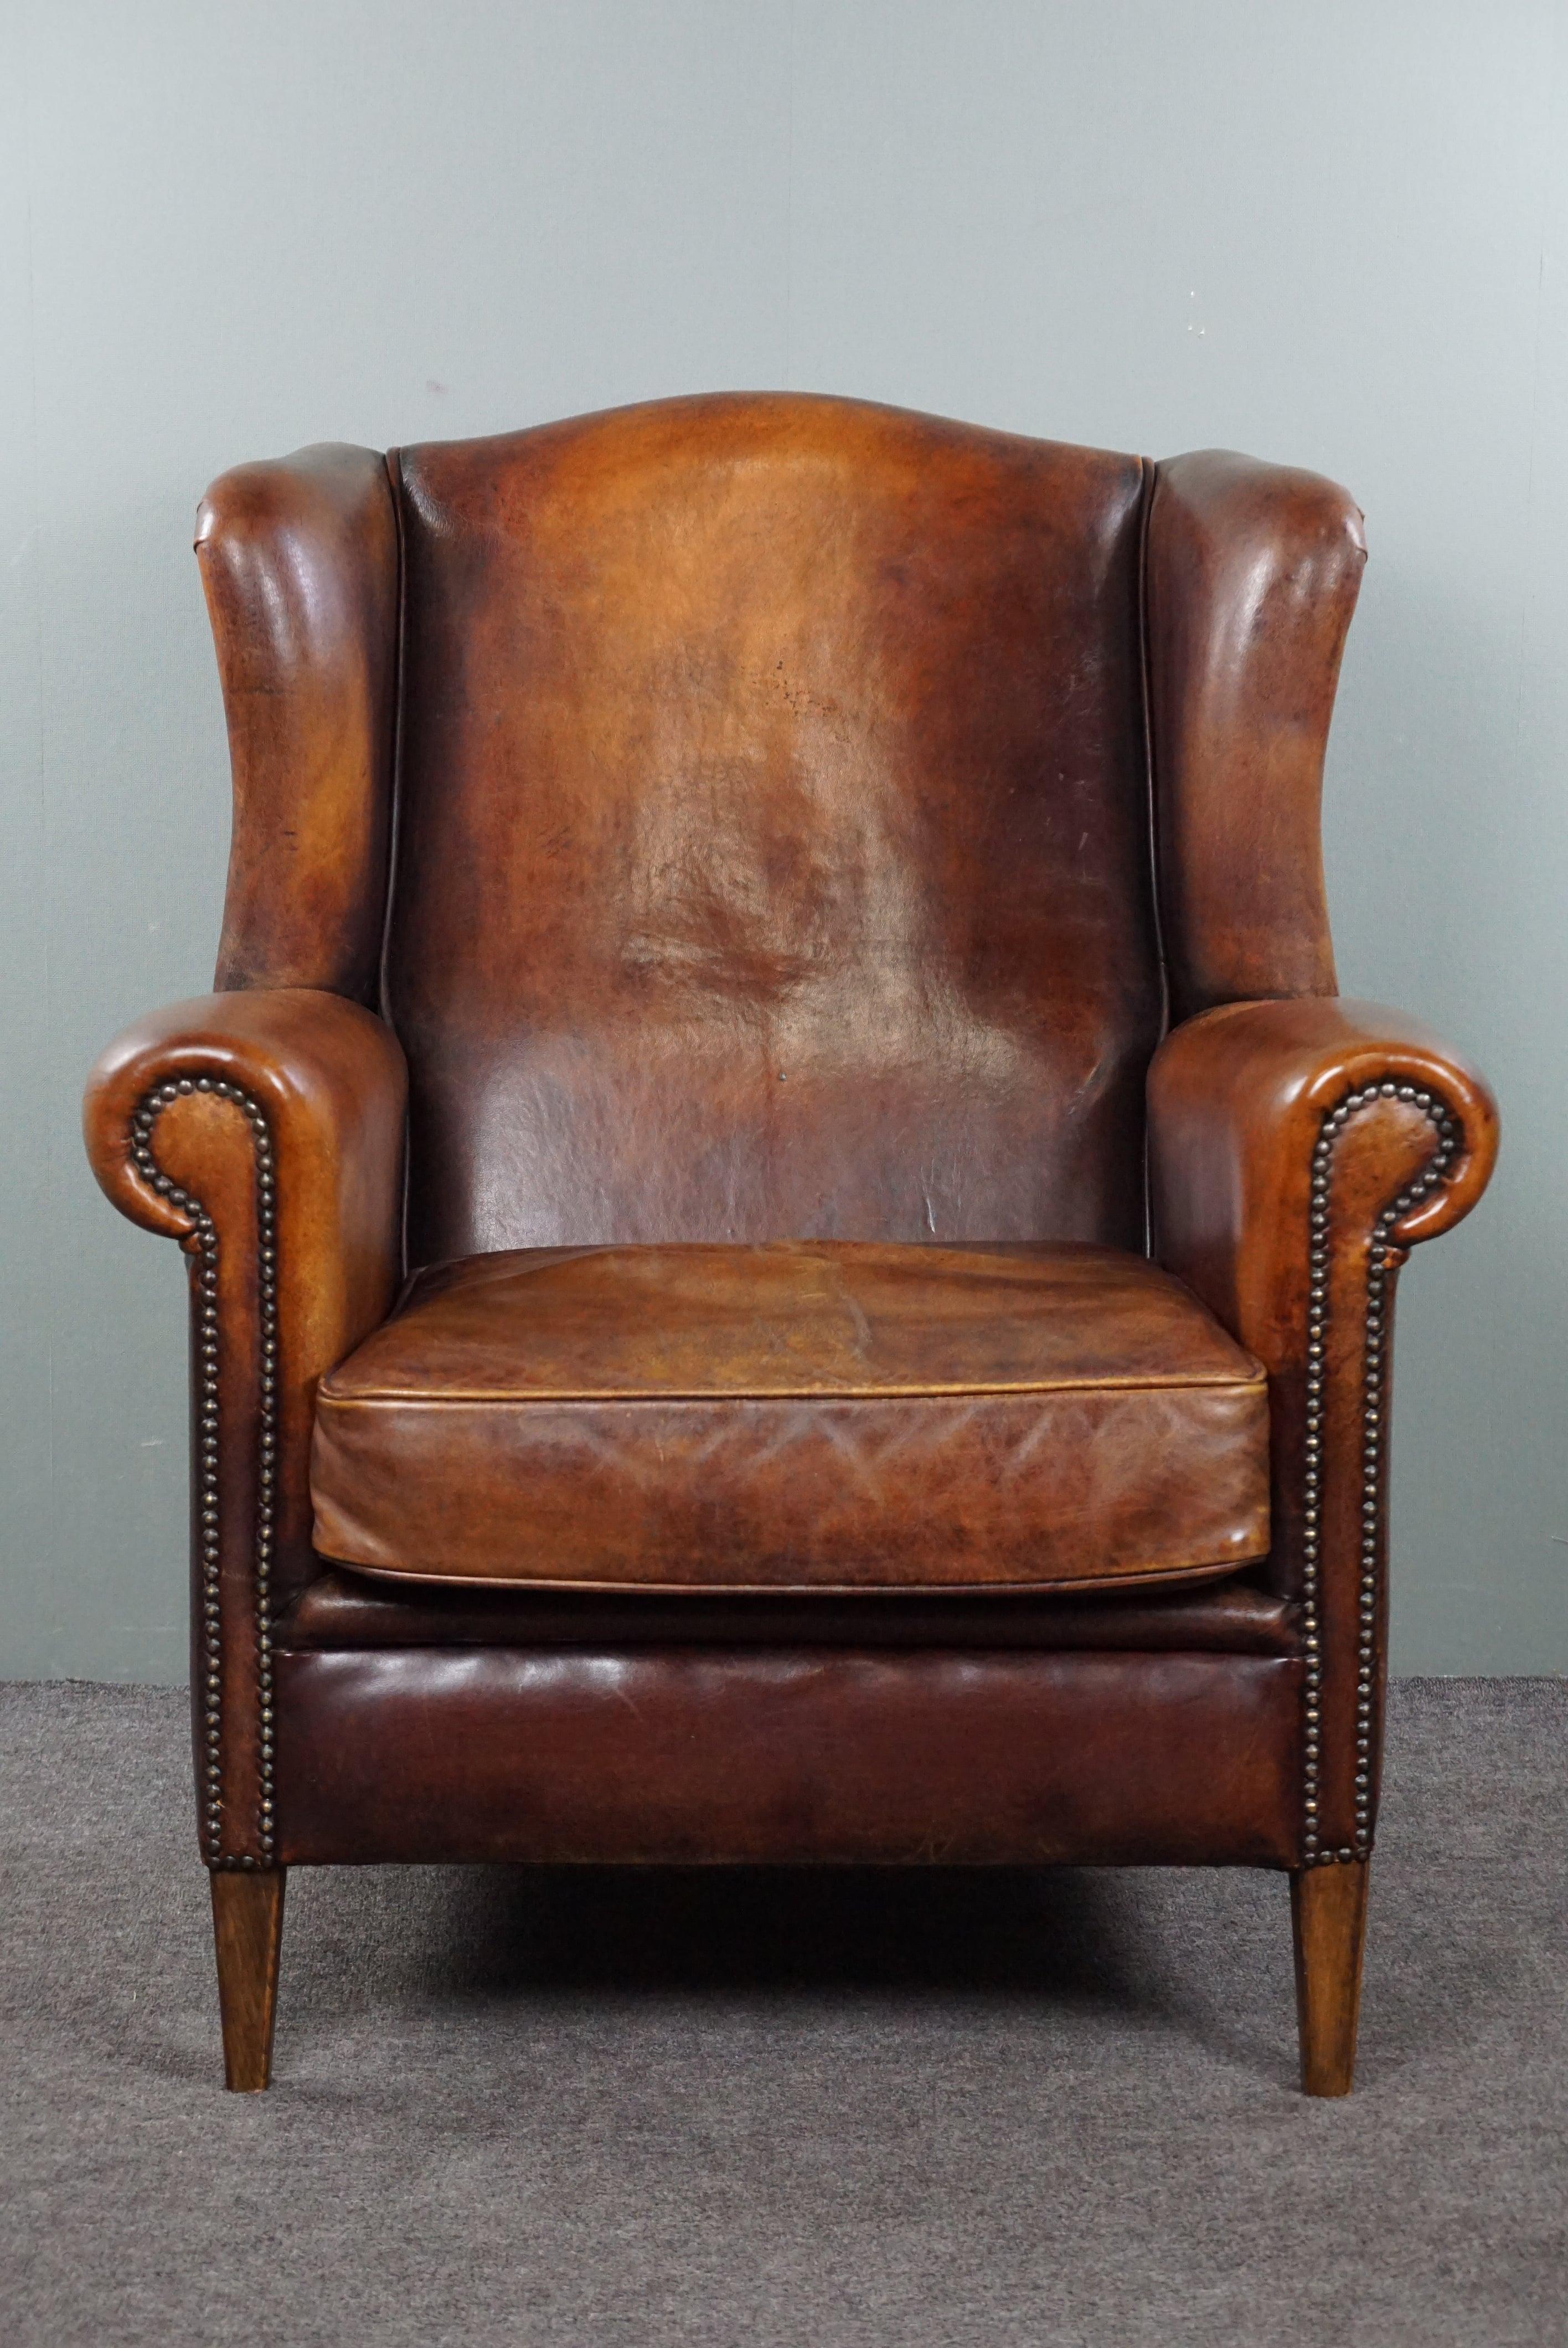 Offered is this beautiful and comfortable sheep leather wingback chair with fantastic warm hues. In this world, there will always be timeless classics. Whether it's a specific perfume, songs, or clothing items, almost everyone will know and